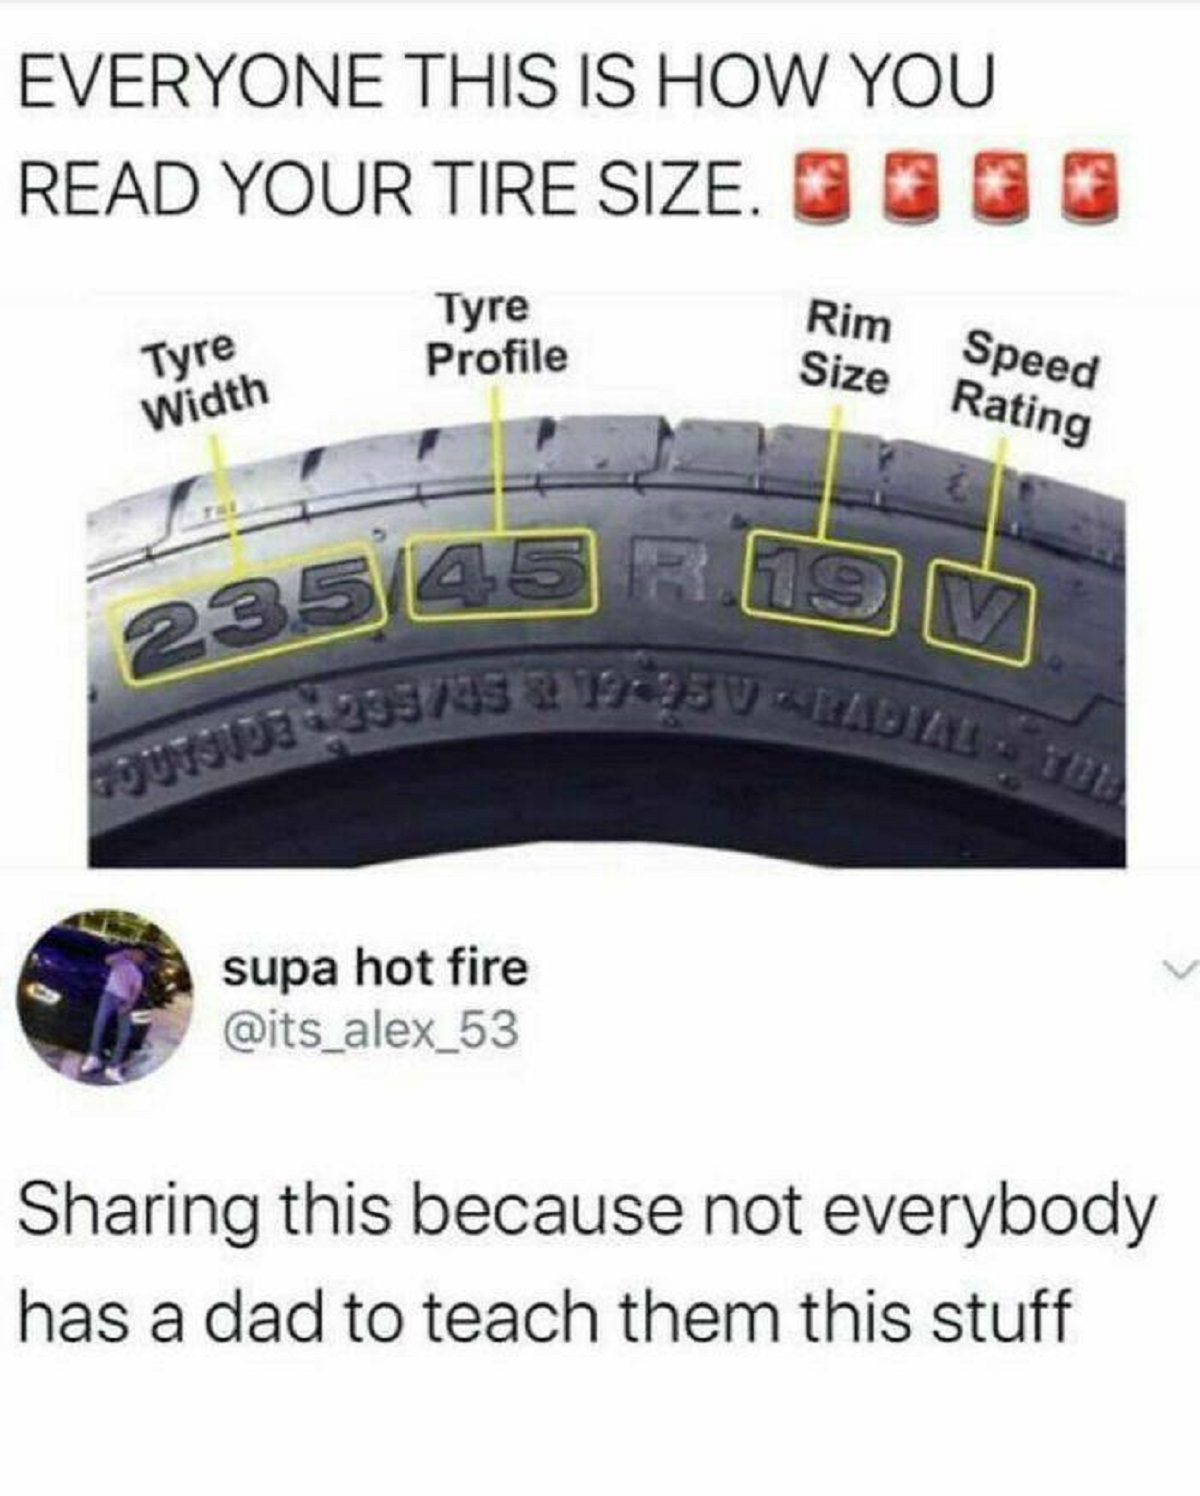 everyone this is how you read your tire size - Everyone This Is How You Read Your Tire Size. Tyre Tyre Profile Rim Width Speed Size Rating 23545 R19 V Outside 29545 & 1925V Radial Tul supa hot fire Sharing this because not everybody has a dad to teach the